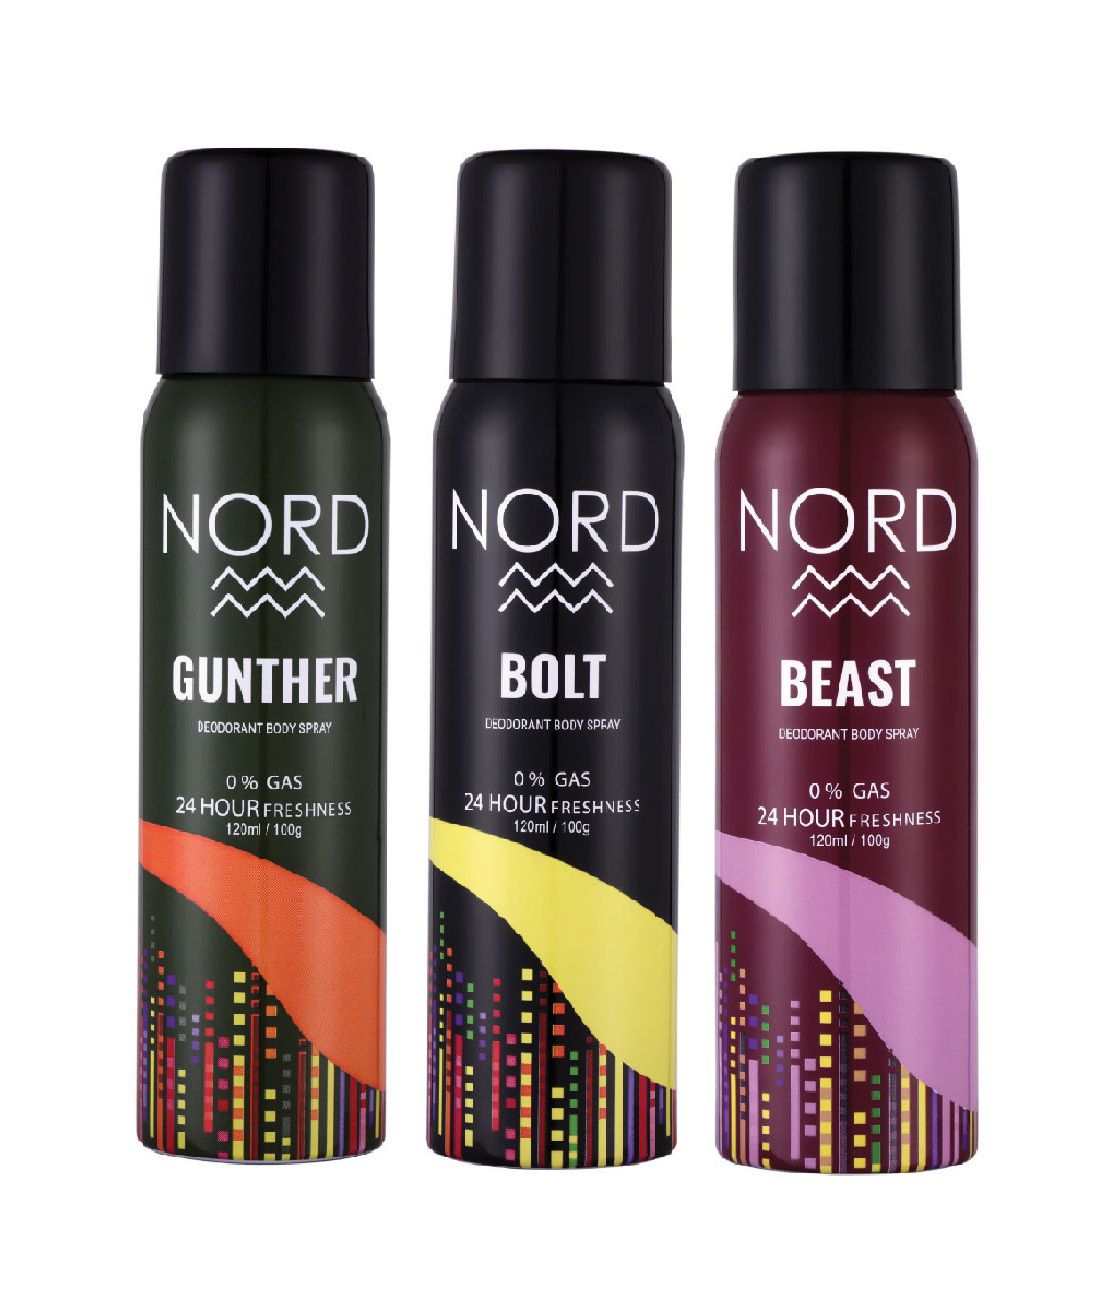     			NORD Deodorant Body Spray - Gunther, Bolt and Beast 120 ml each (Pack of 3)